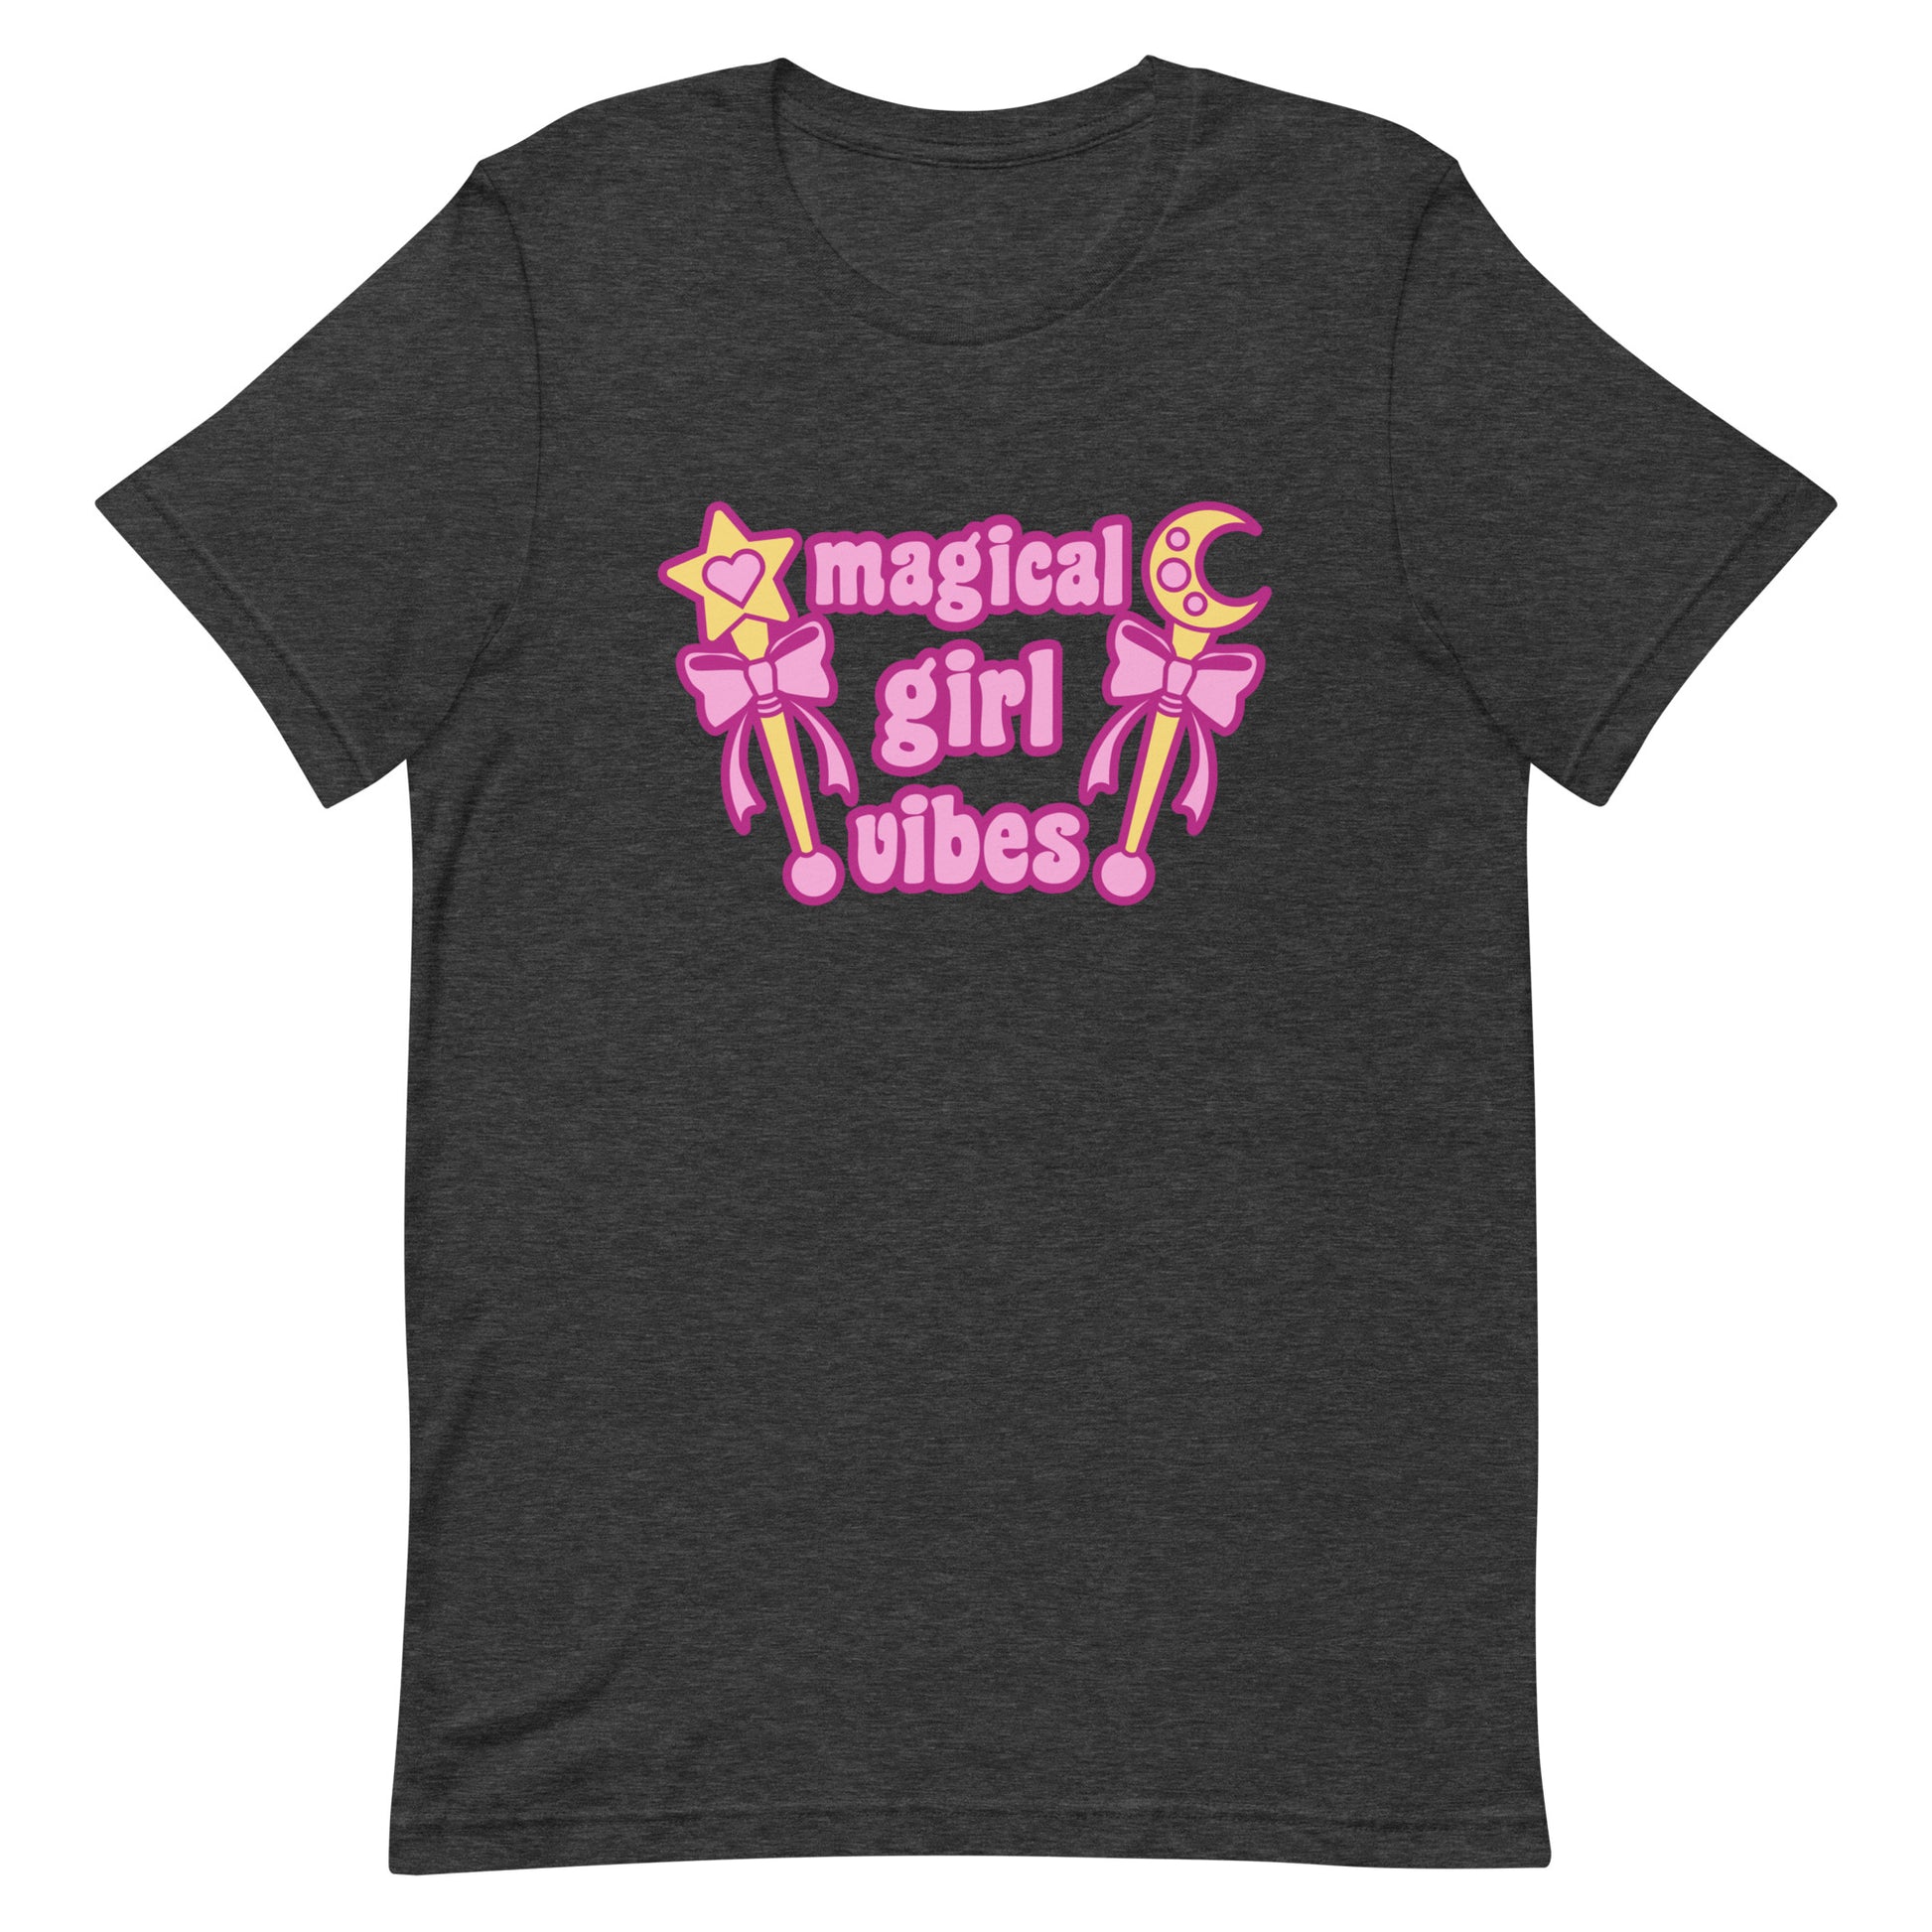 A dark heathered grey crewneck t-shirt featuring two gold wands with pink bows and pink text reading "Magical girl vibes"